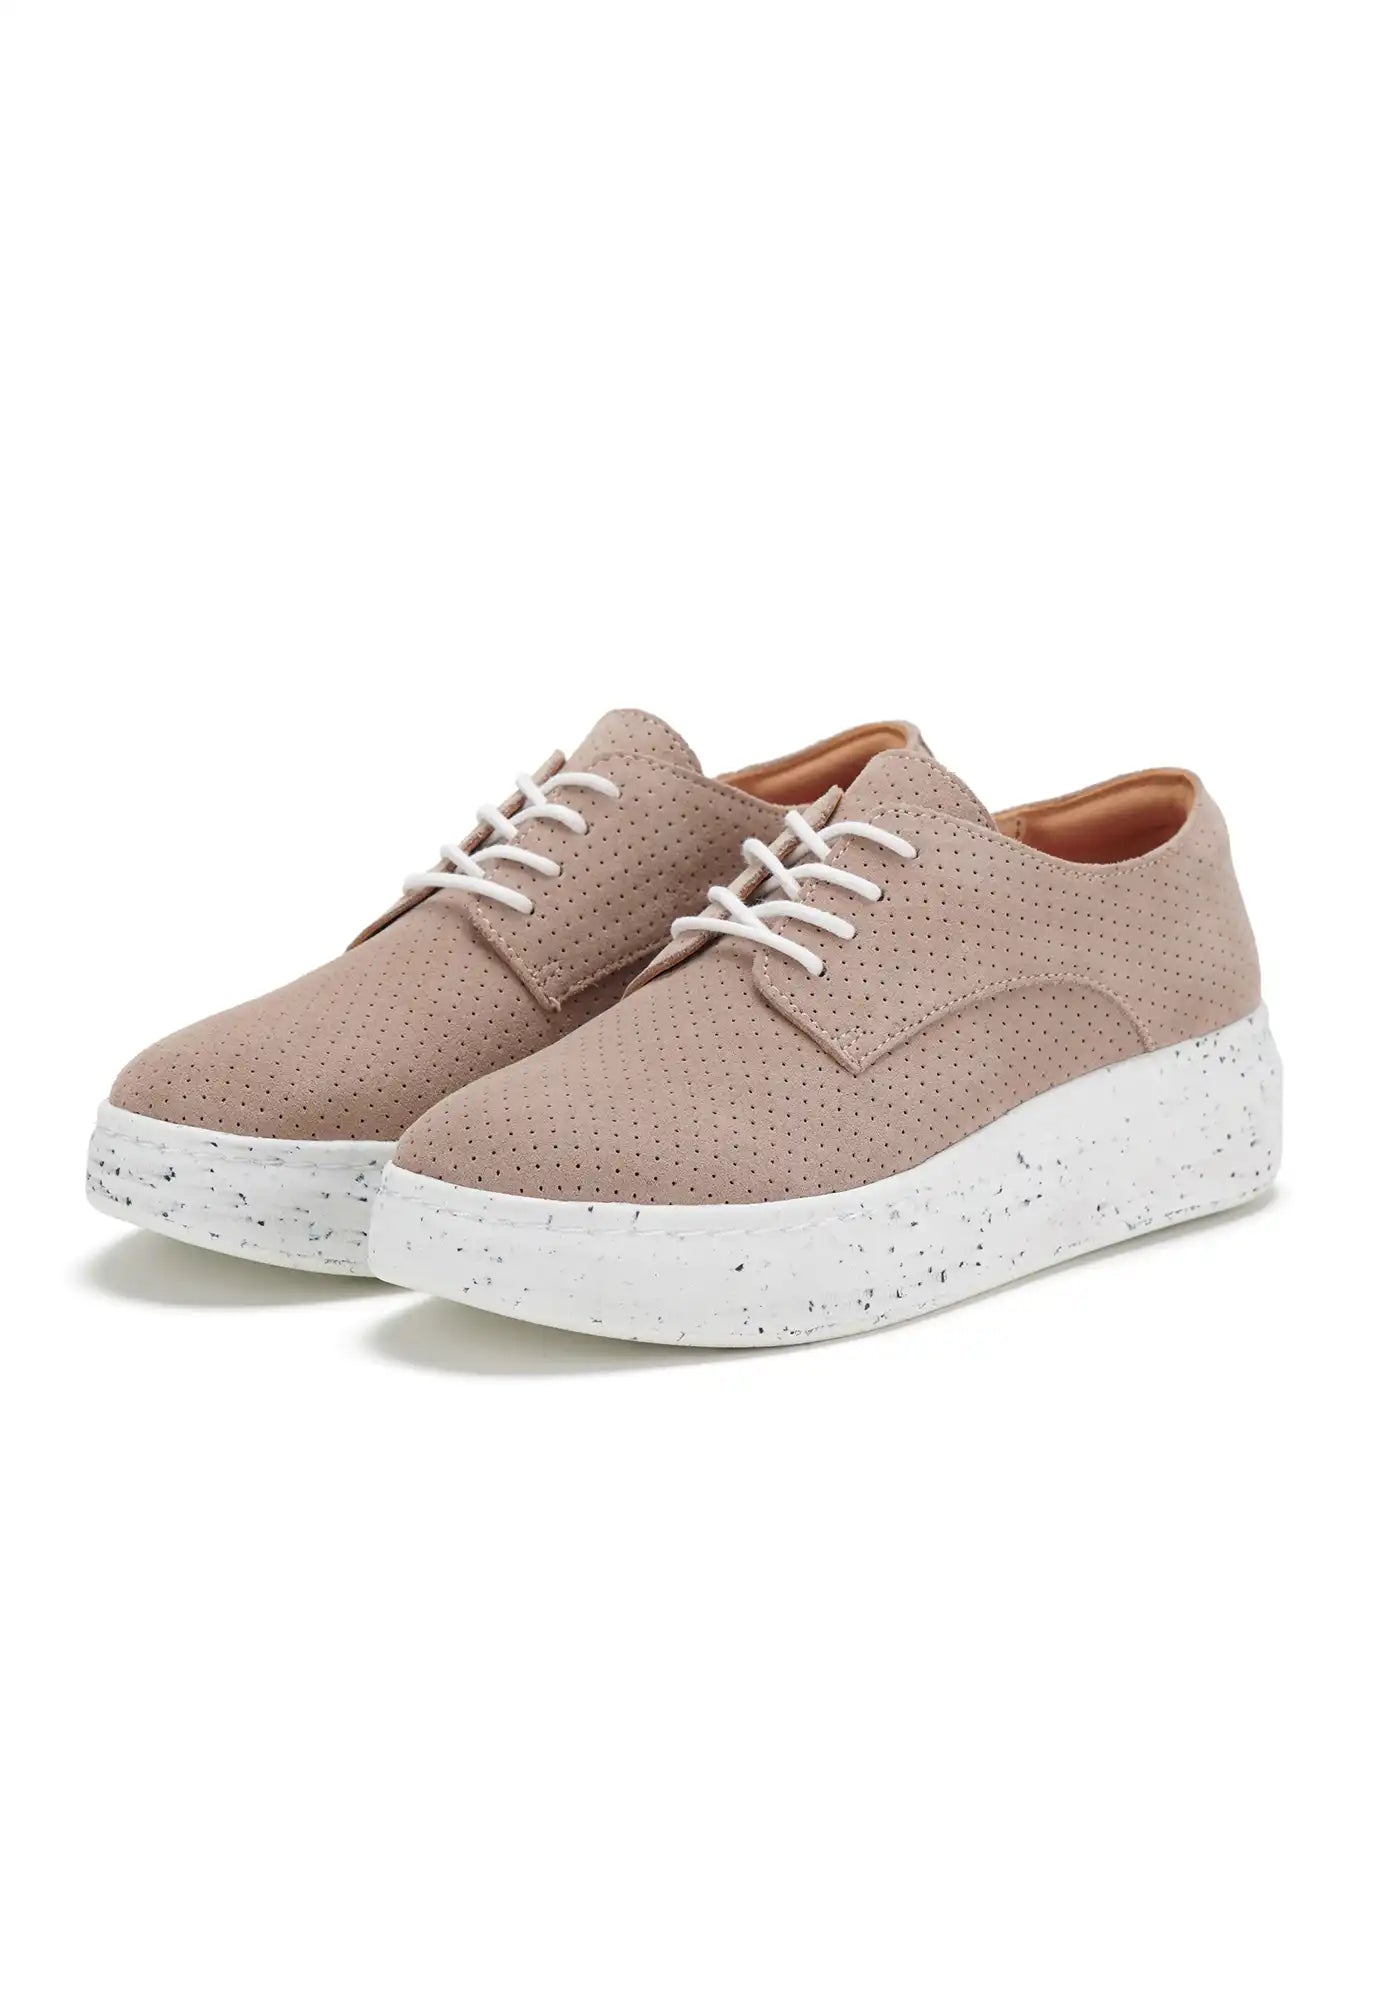 rollie - derby city - pin punch - taupe suede